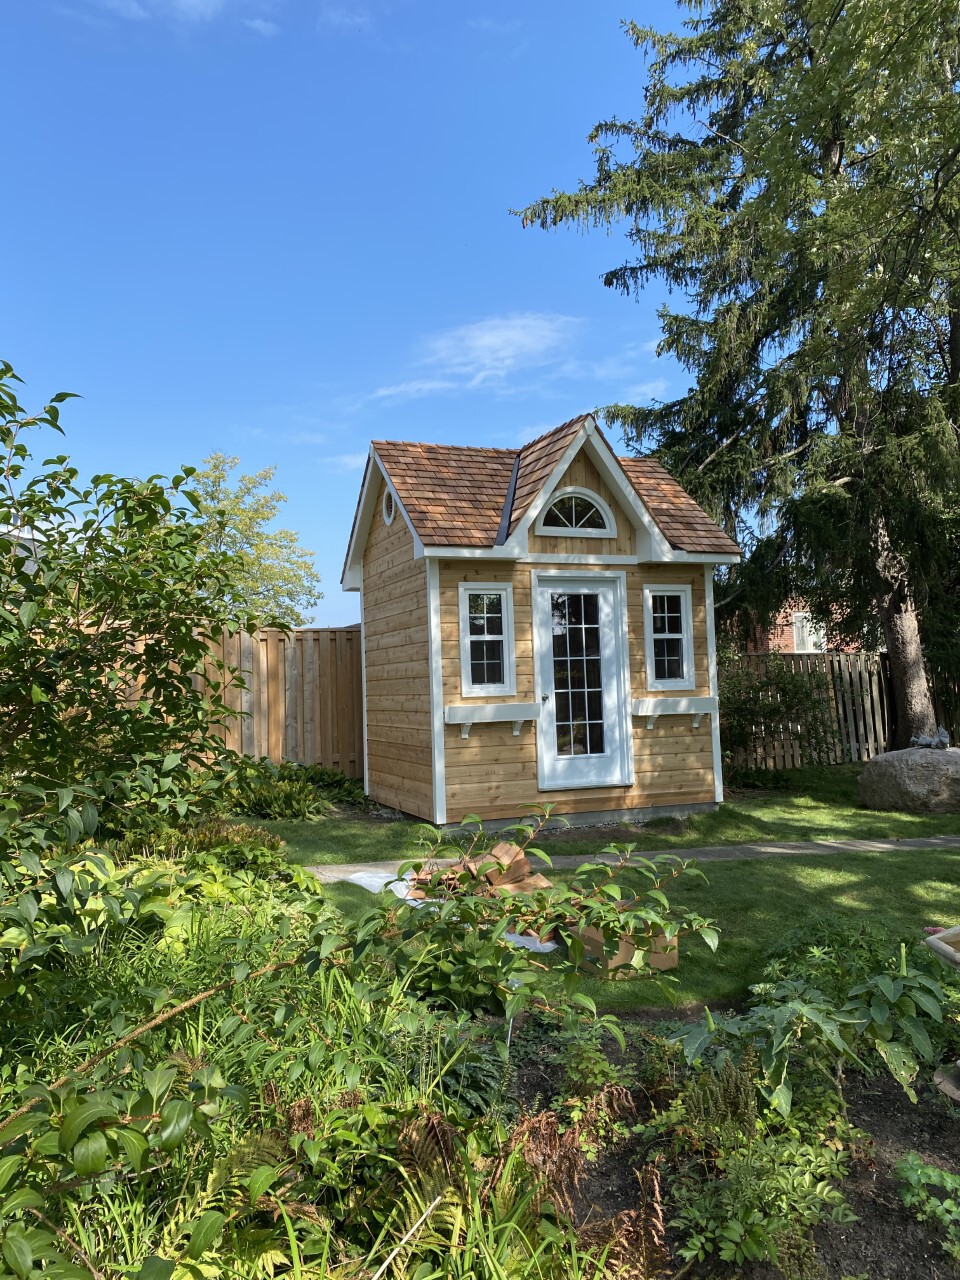 Front view of 8’ x 10' Copper Creek Garden Shed located in Pickering, Ontario – Summerwood Produ